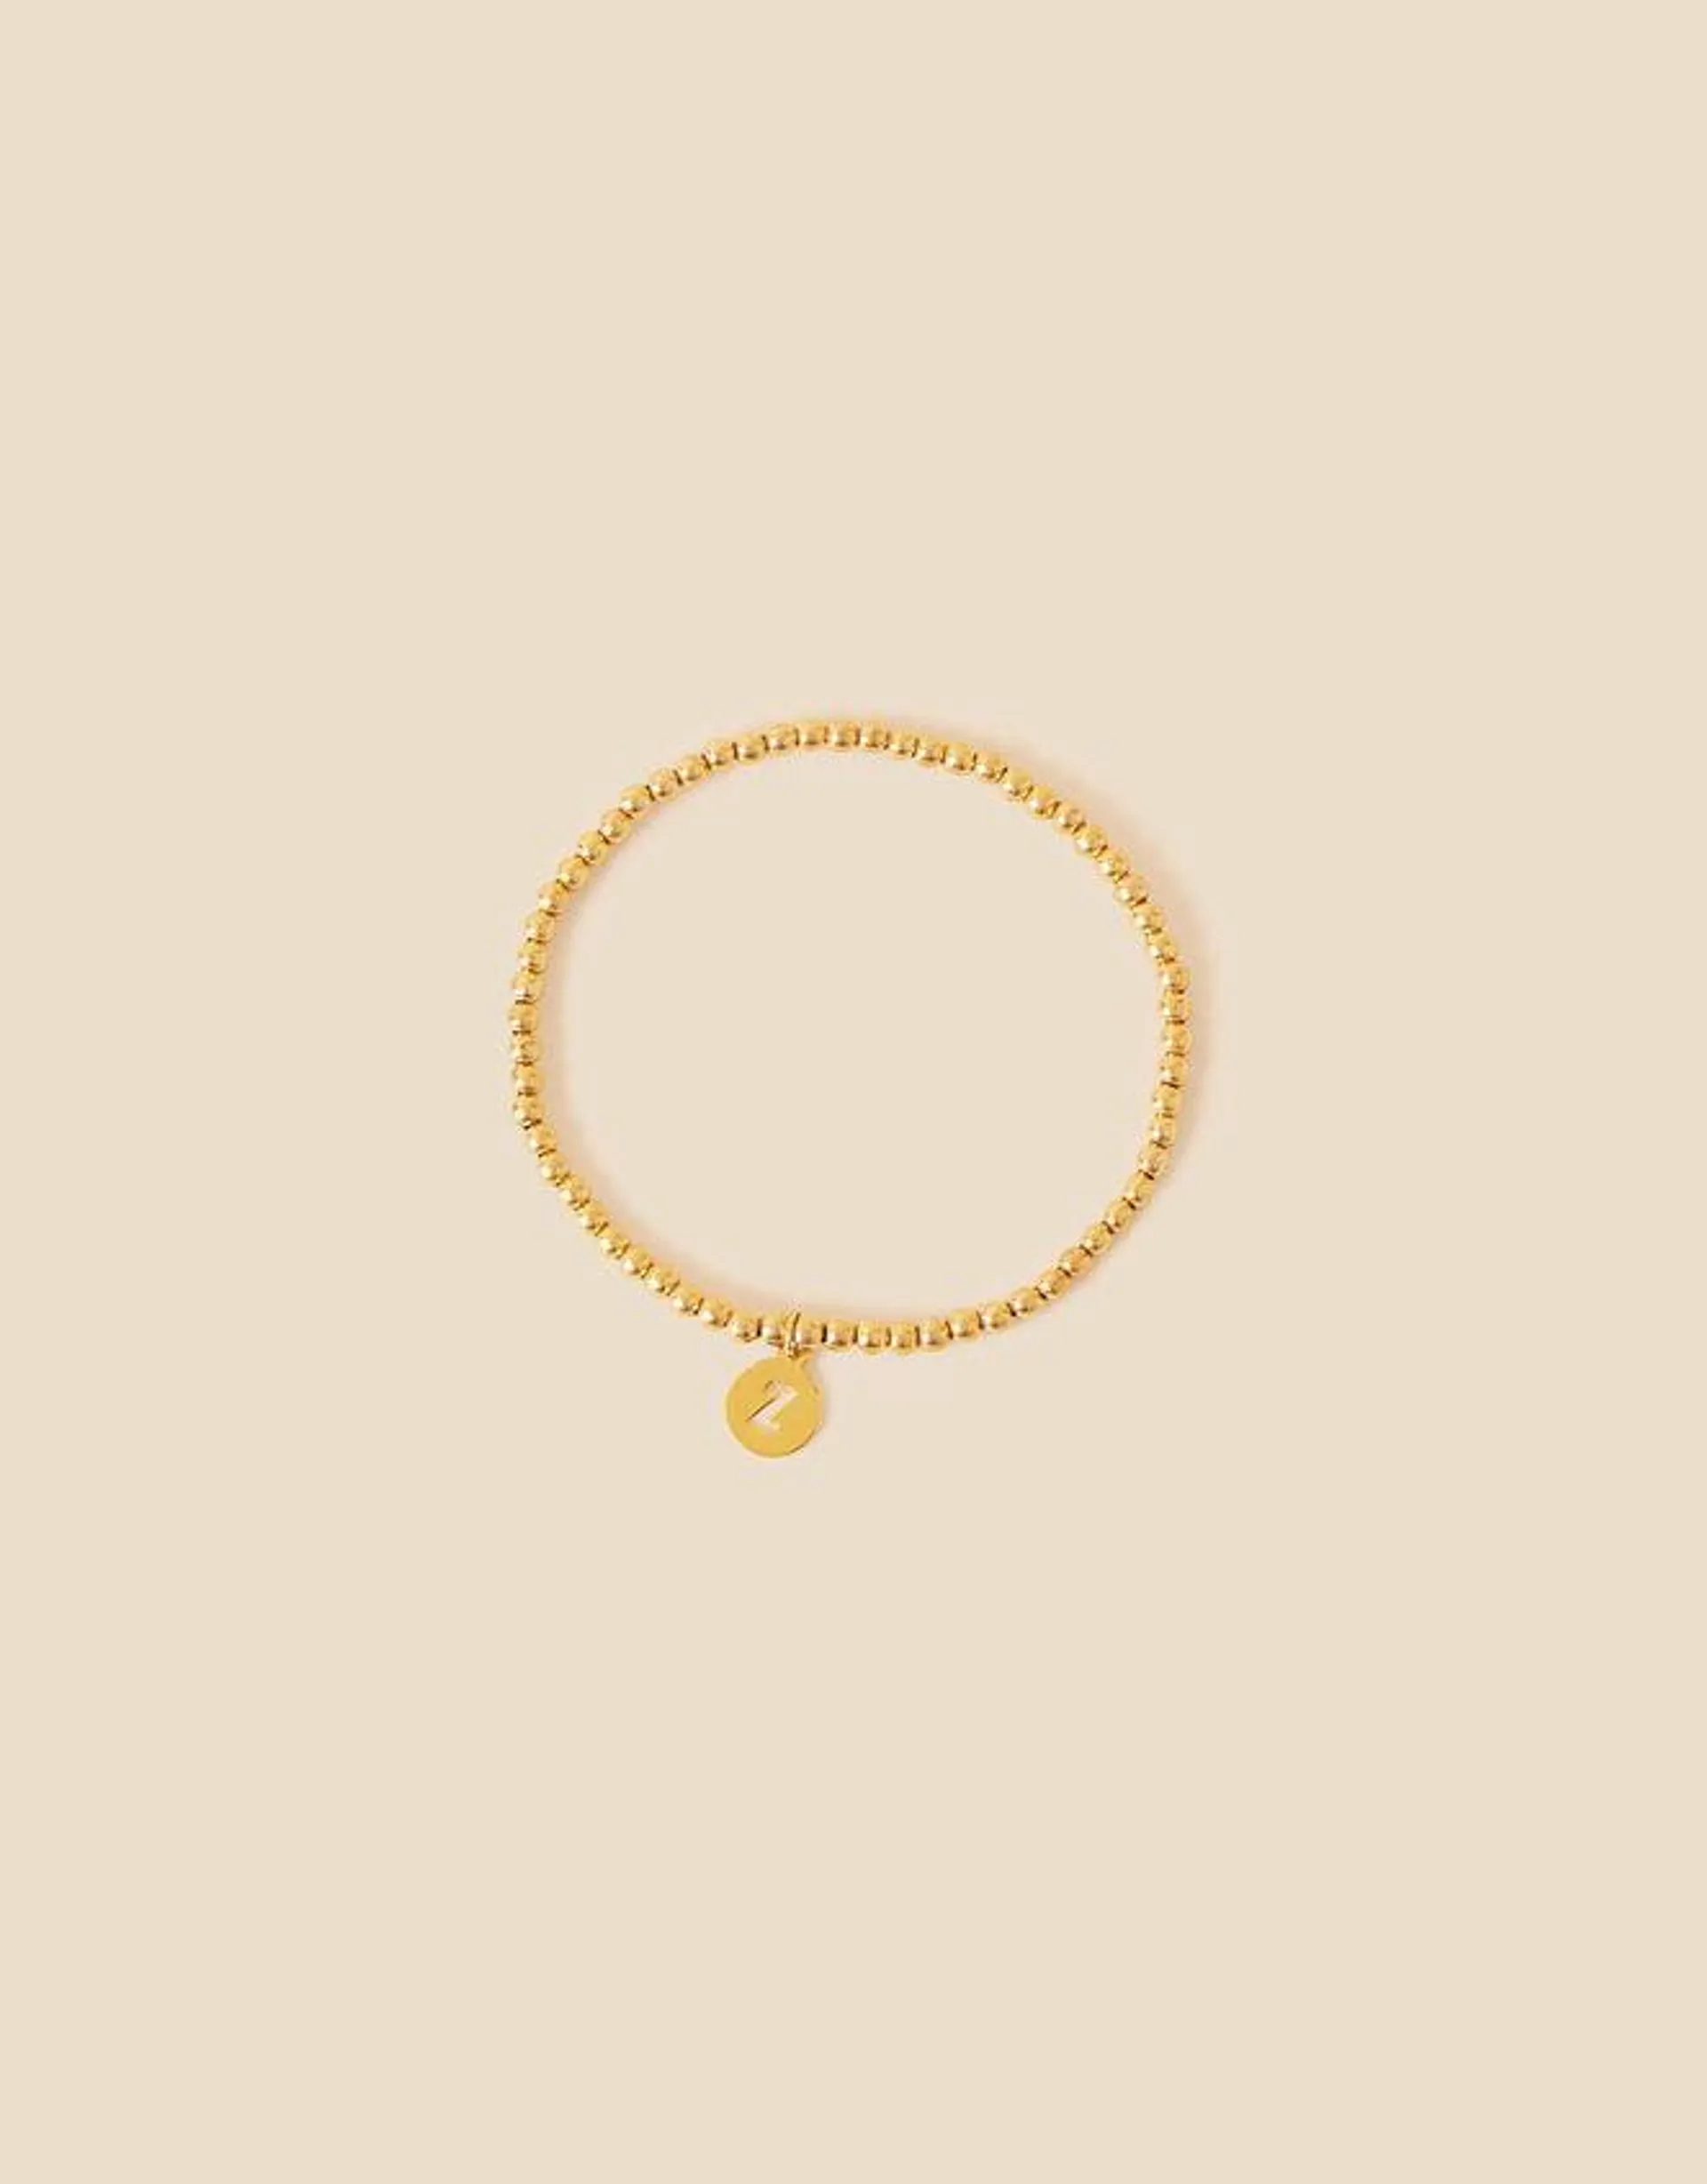 14ct Gold-Plated Ball Chain Bracelet